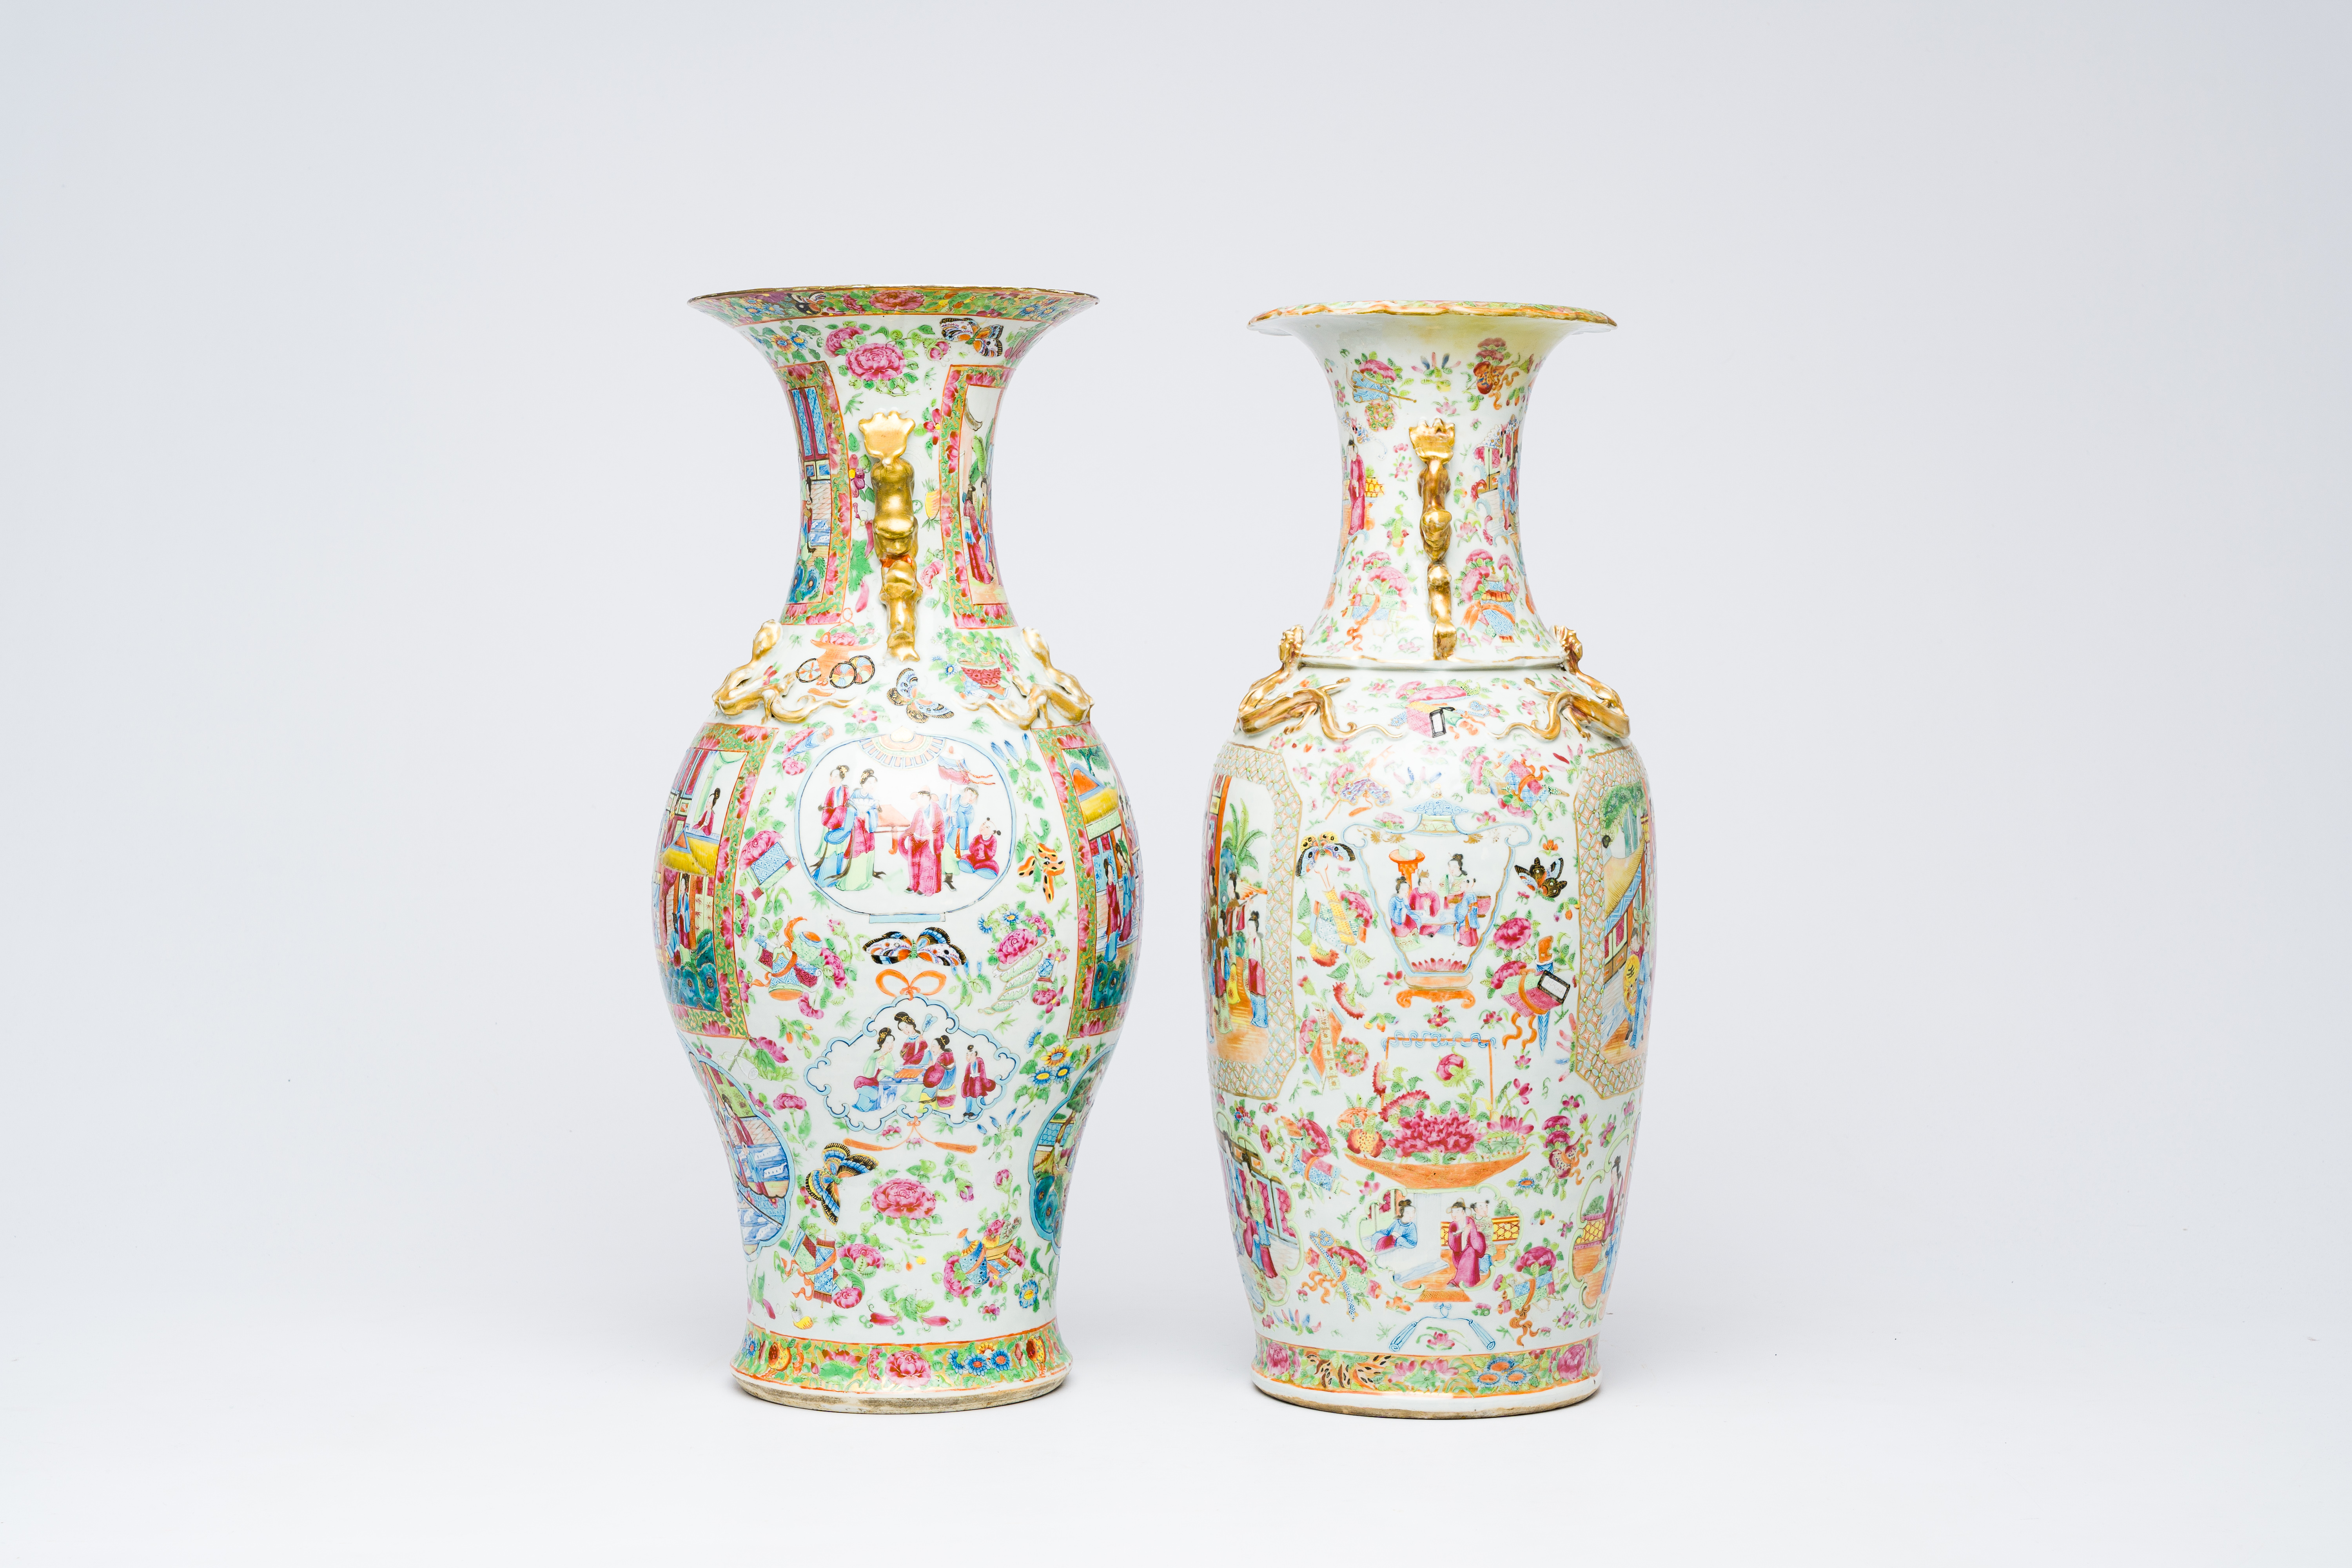 Two Chinese Canton famille rose vases with palace scenes and floral design, 19th C. - Image 3 of 9